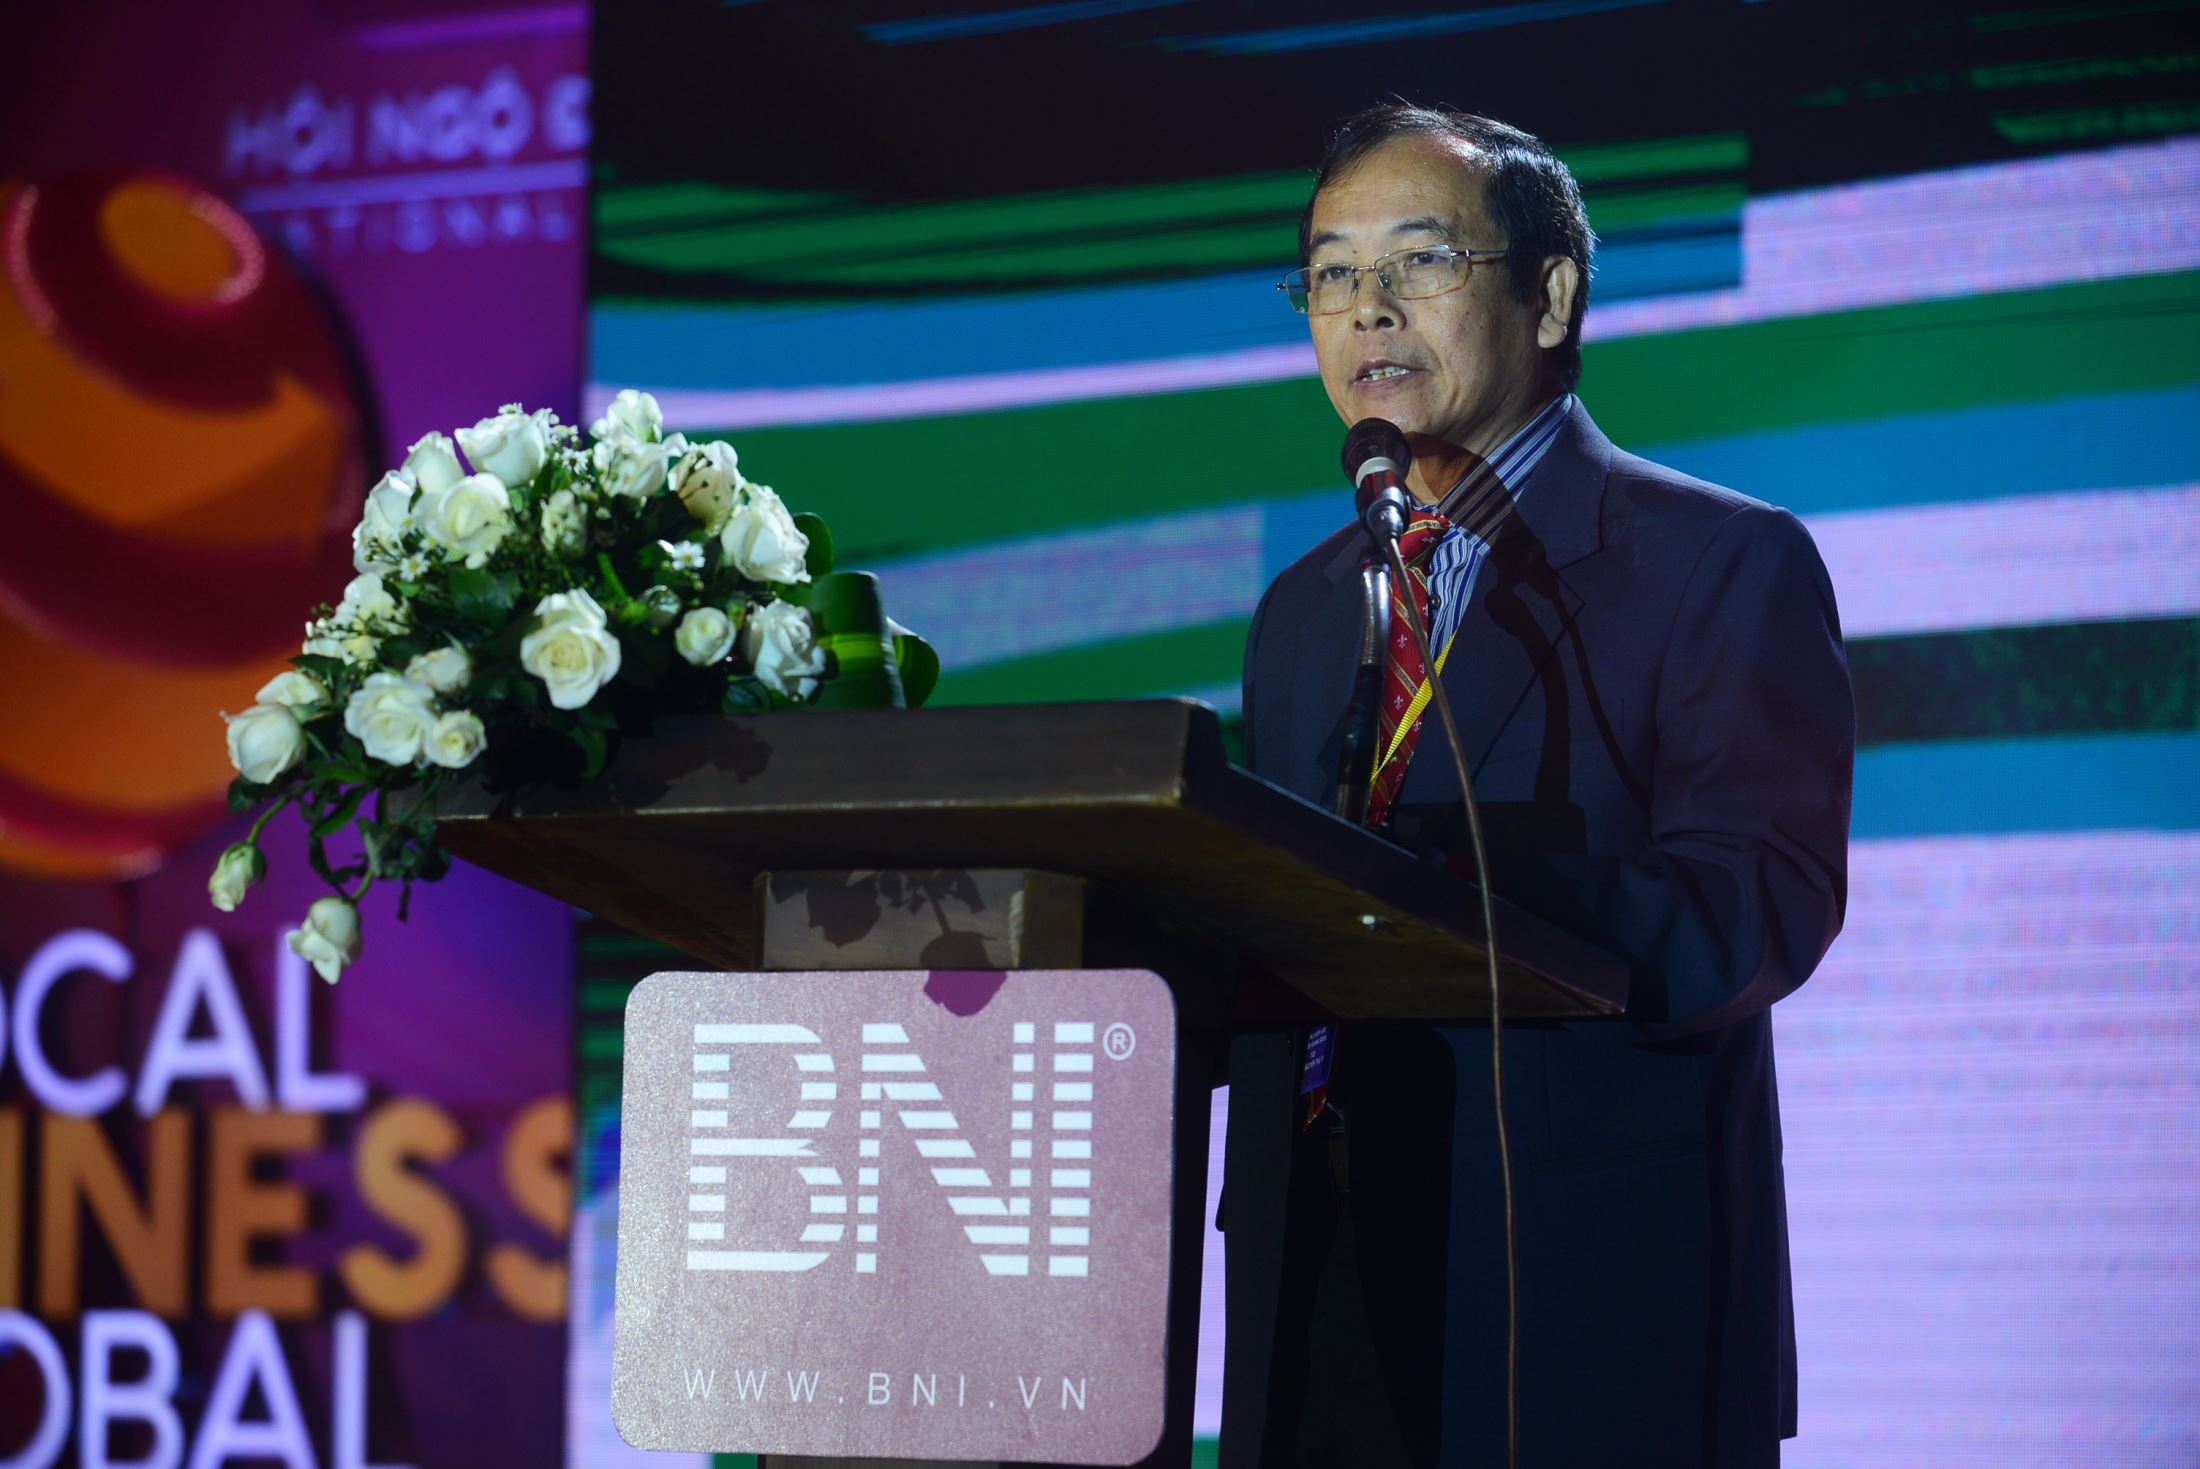 Dr. Do Manh Cuong, Academic Director cum Permanent Member of NHG education council, made speech at the event